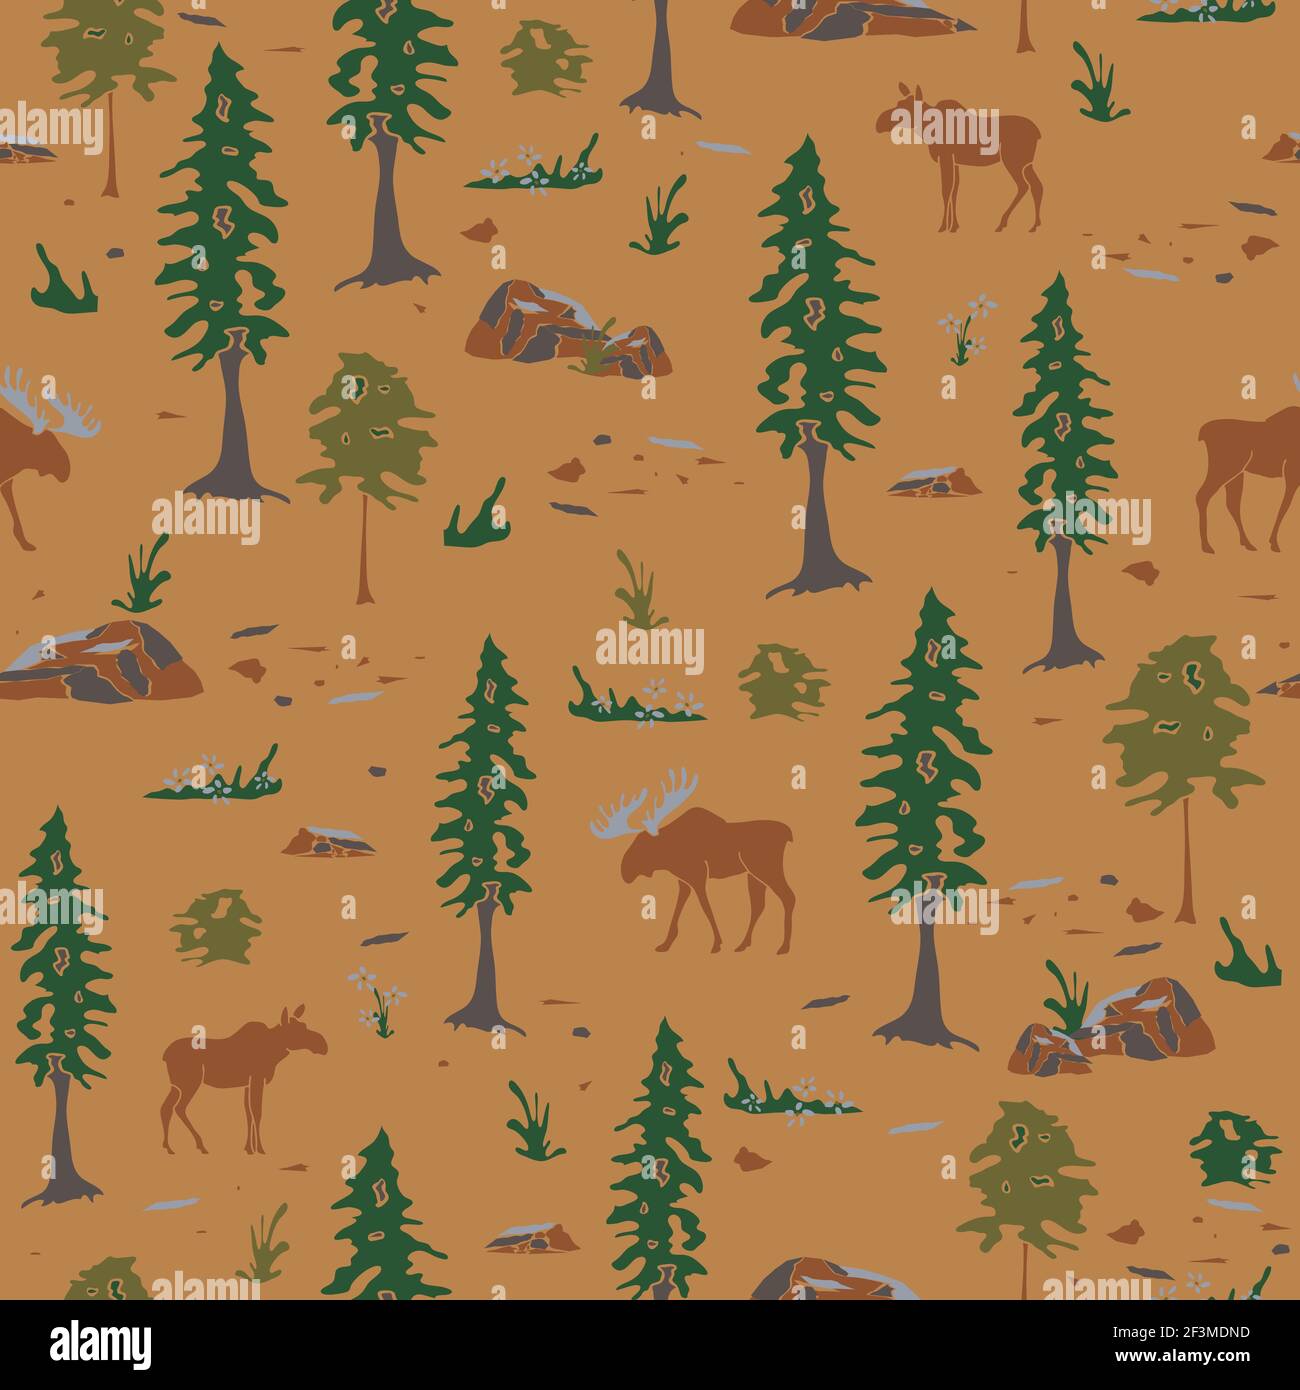 Seamless vector pattern with moose landscape on light brown background.  Canadian forest animal wallpaper design. Stock Vector